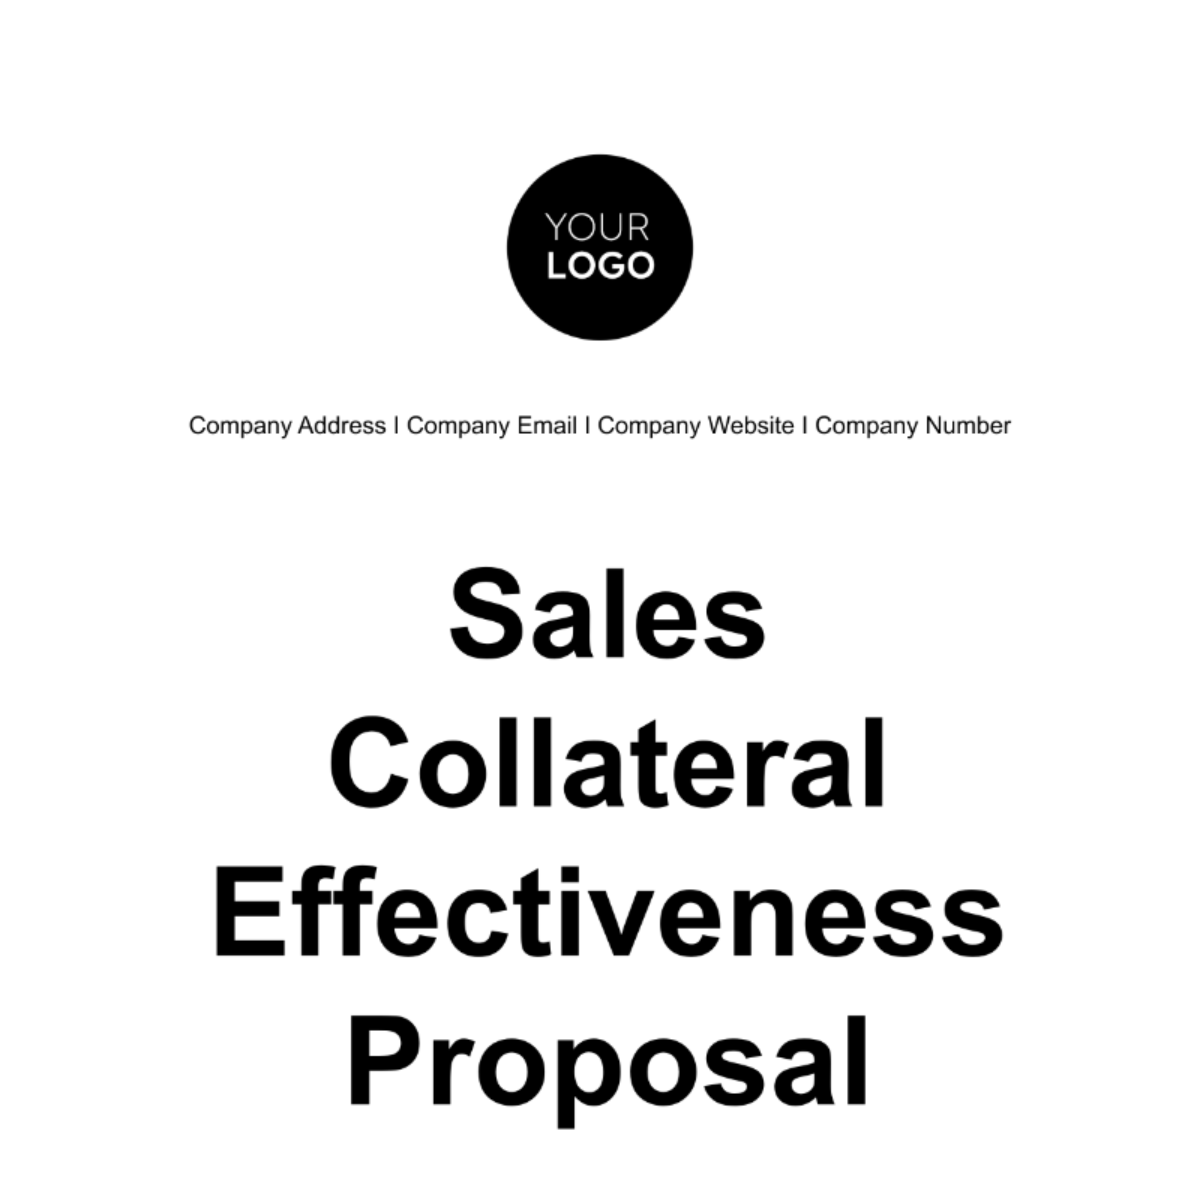 Free Sales Collateral Effectiveness Proposal Template